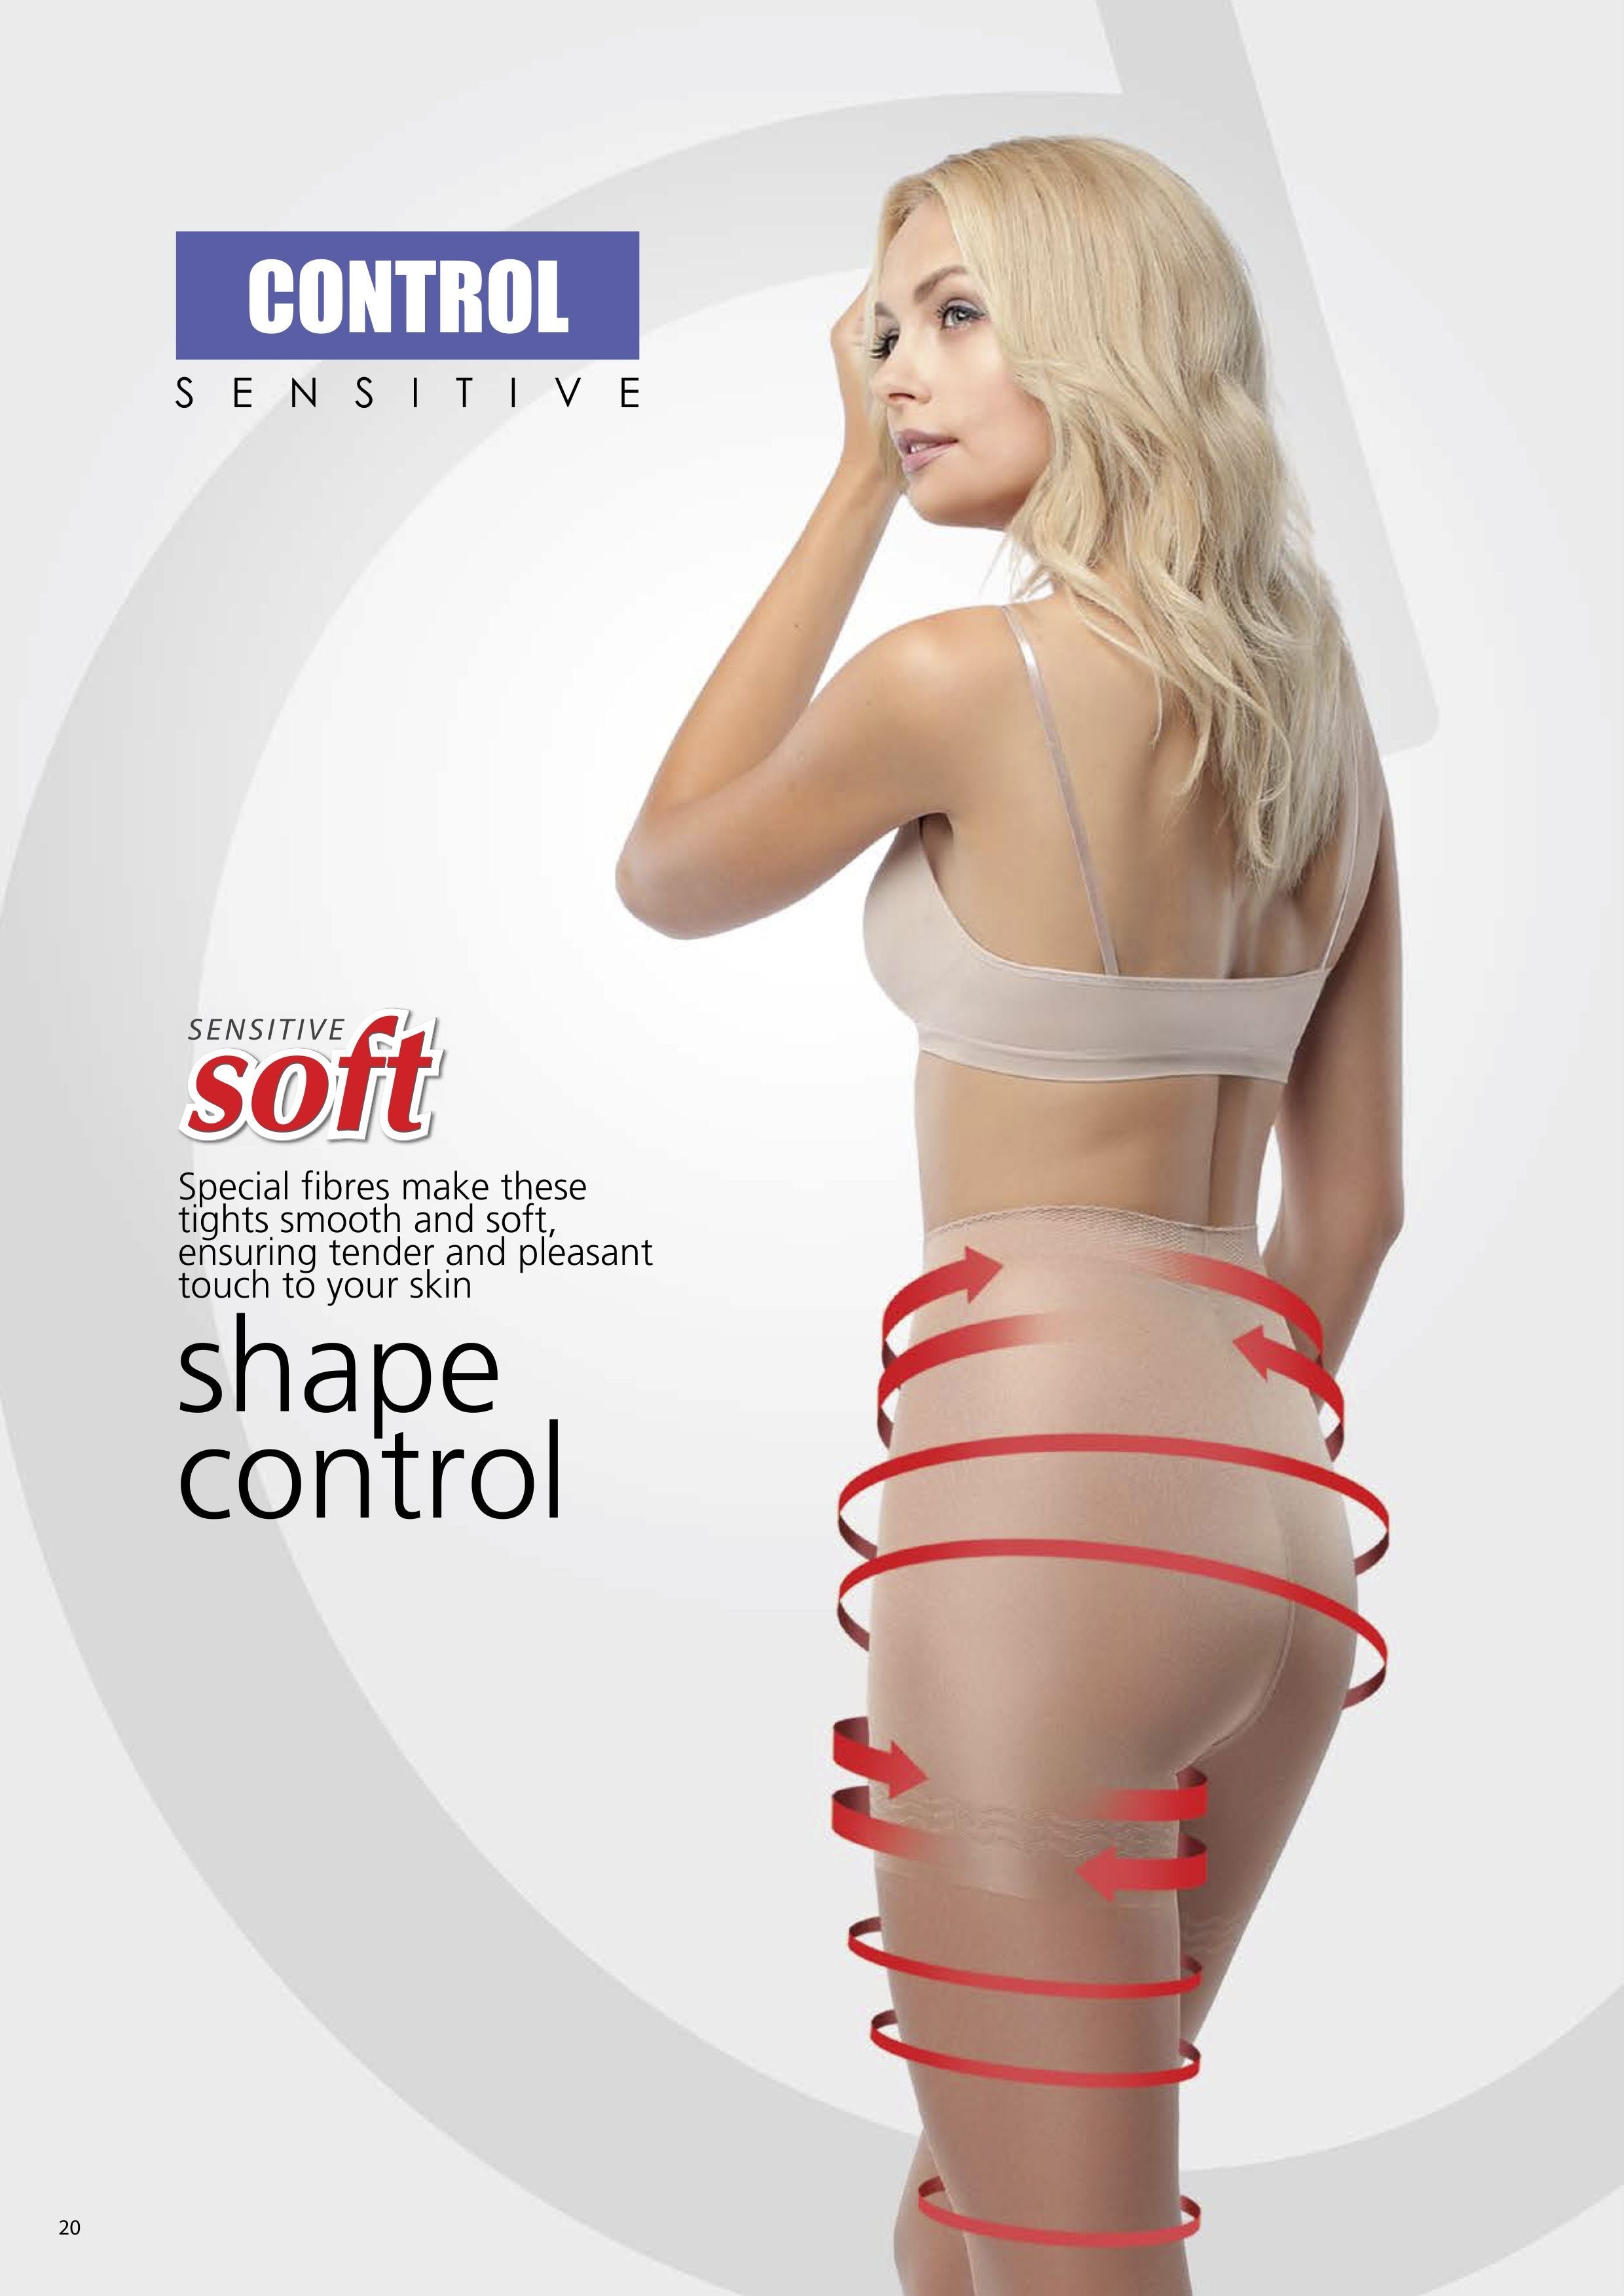 Shapewear support hose push-up tights compression pantyhose Control by Conte Elegant